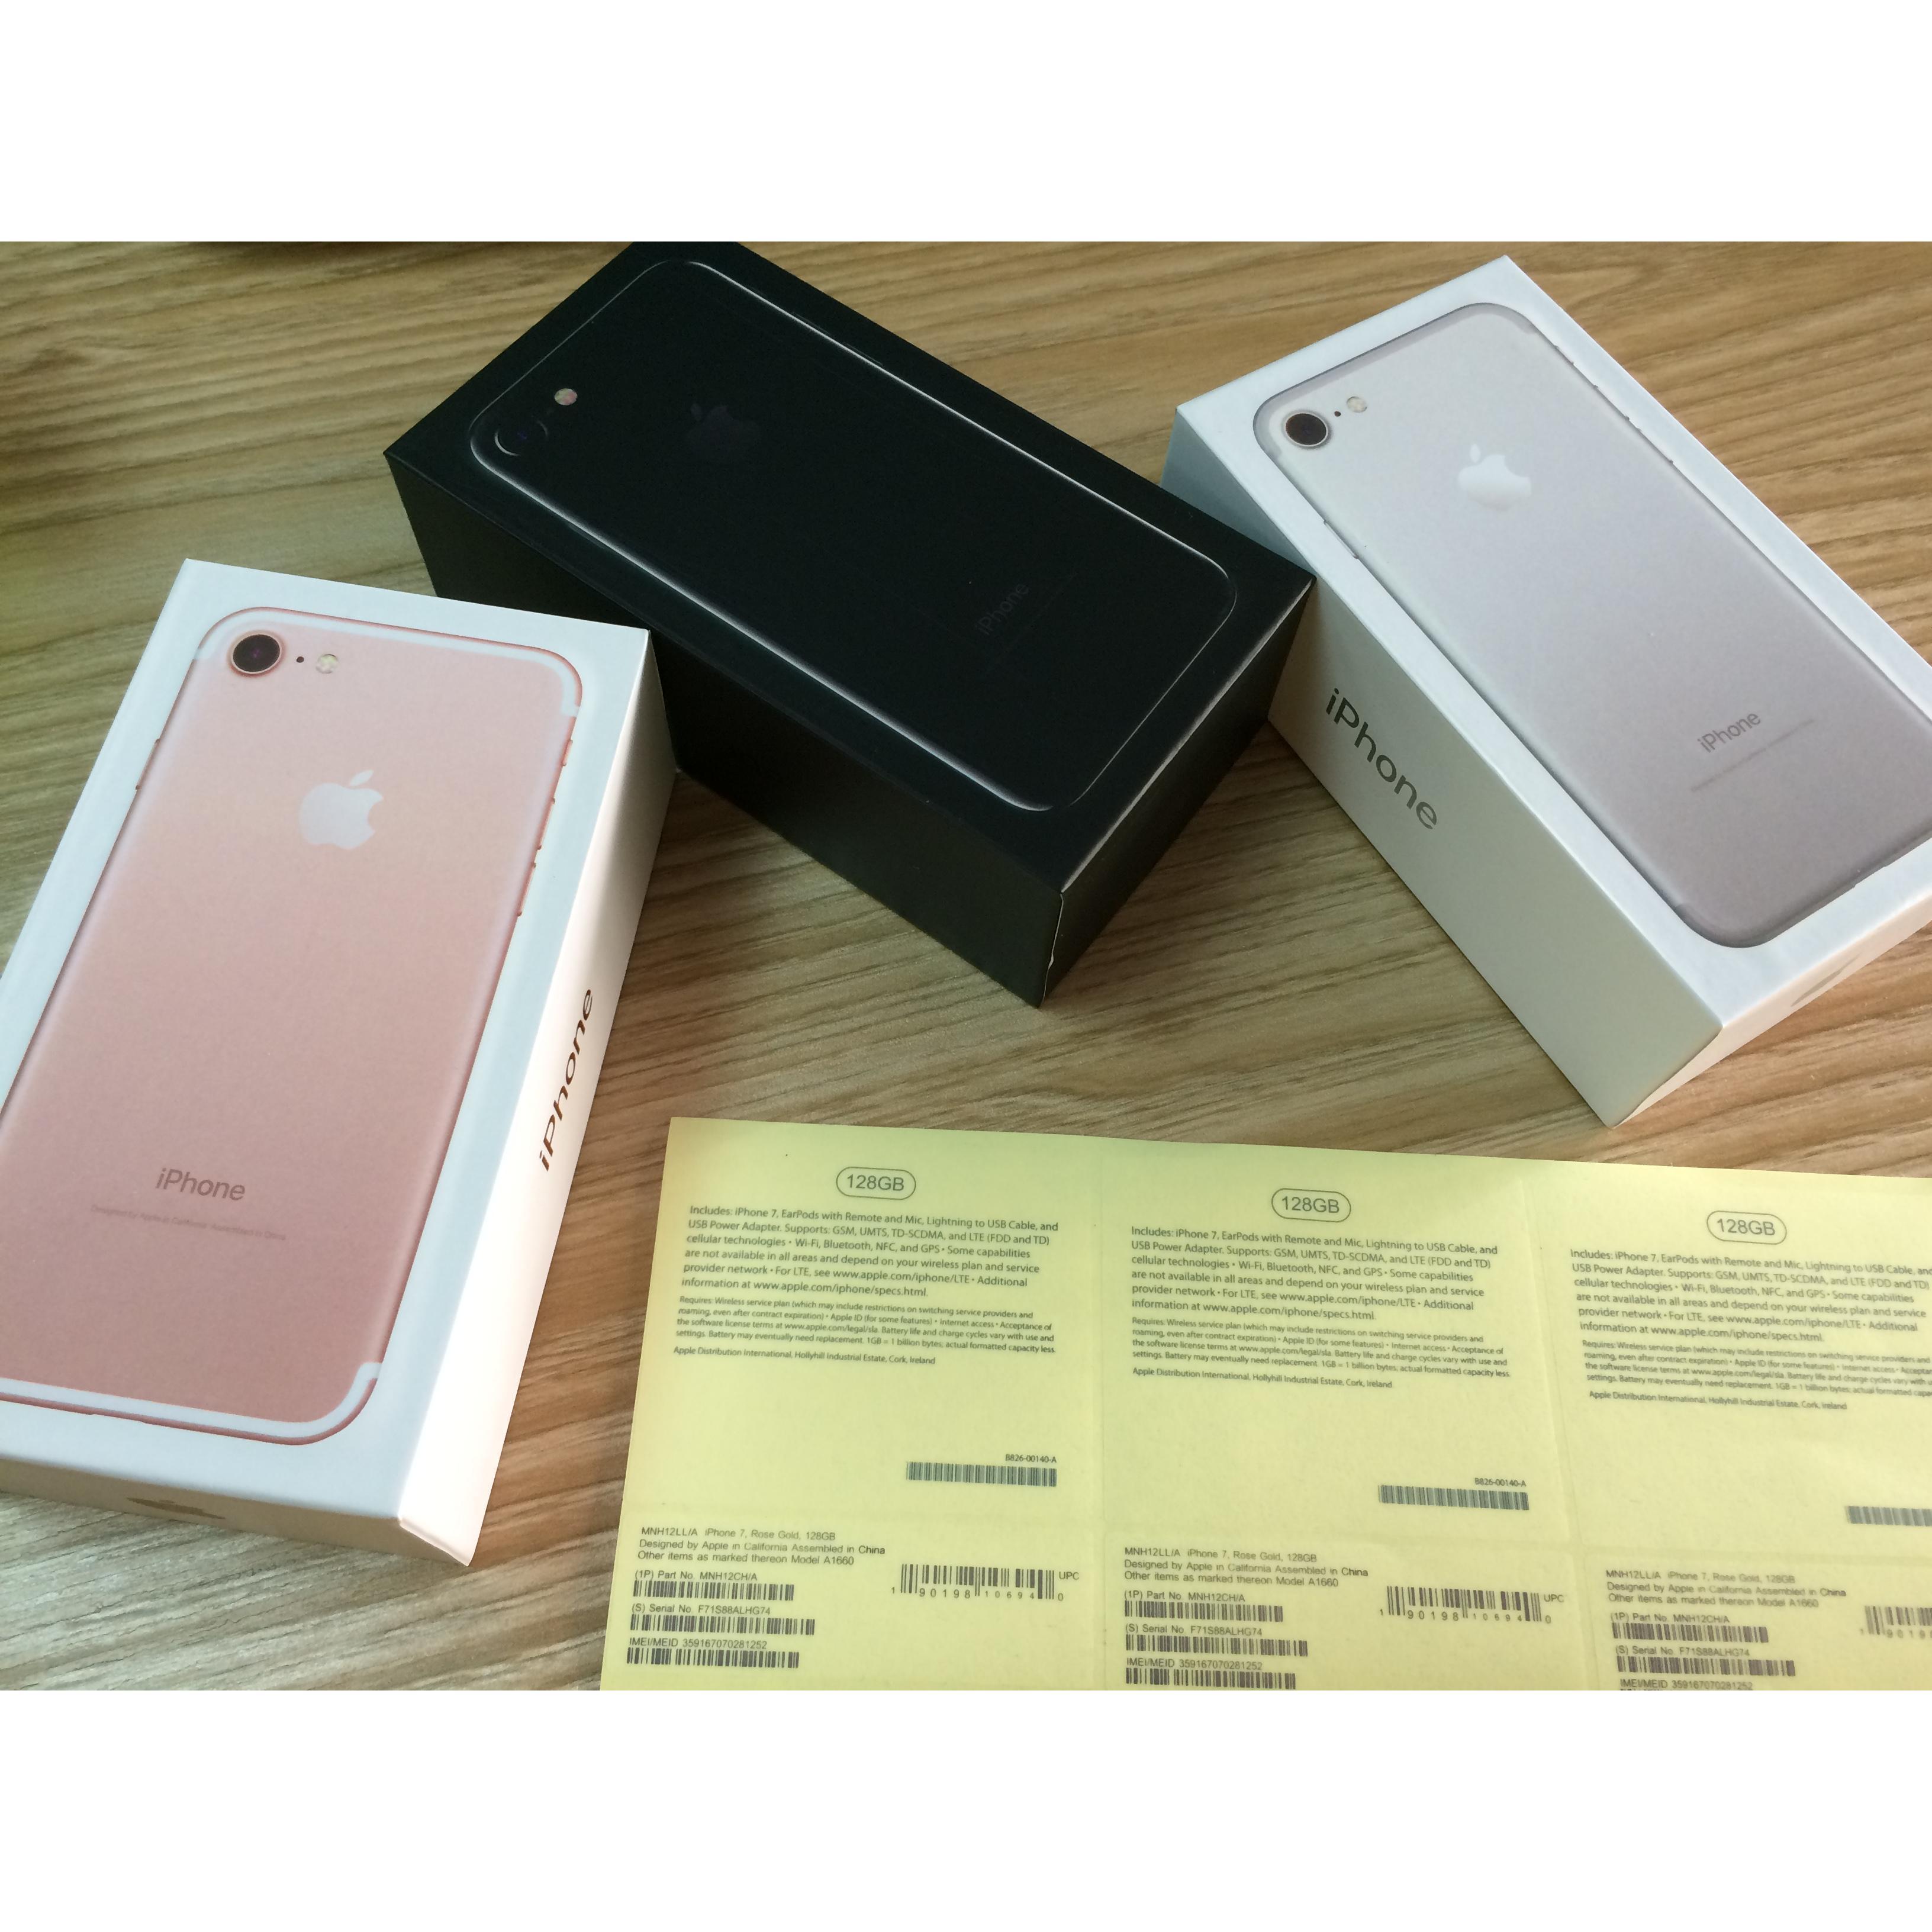 Apple Iphone 7/7+ Boxes Wholesale Suppliers